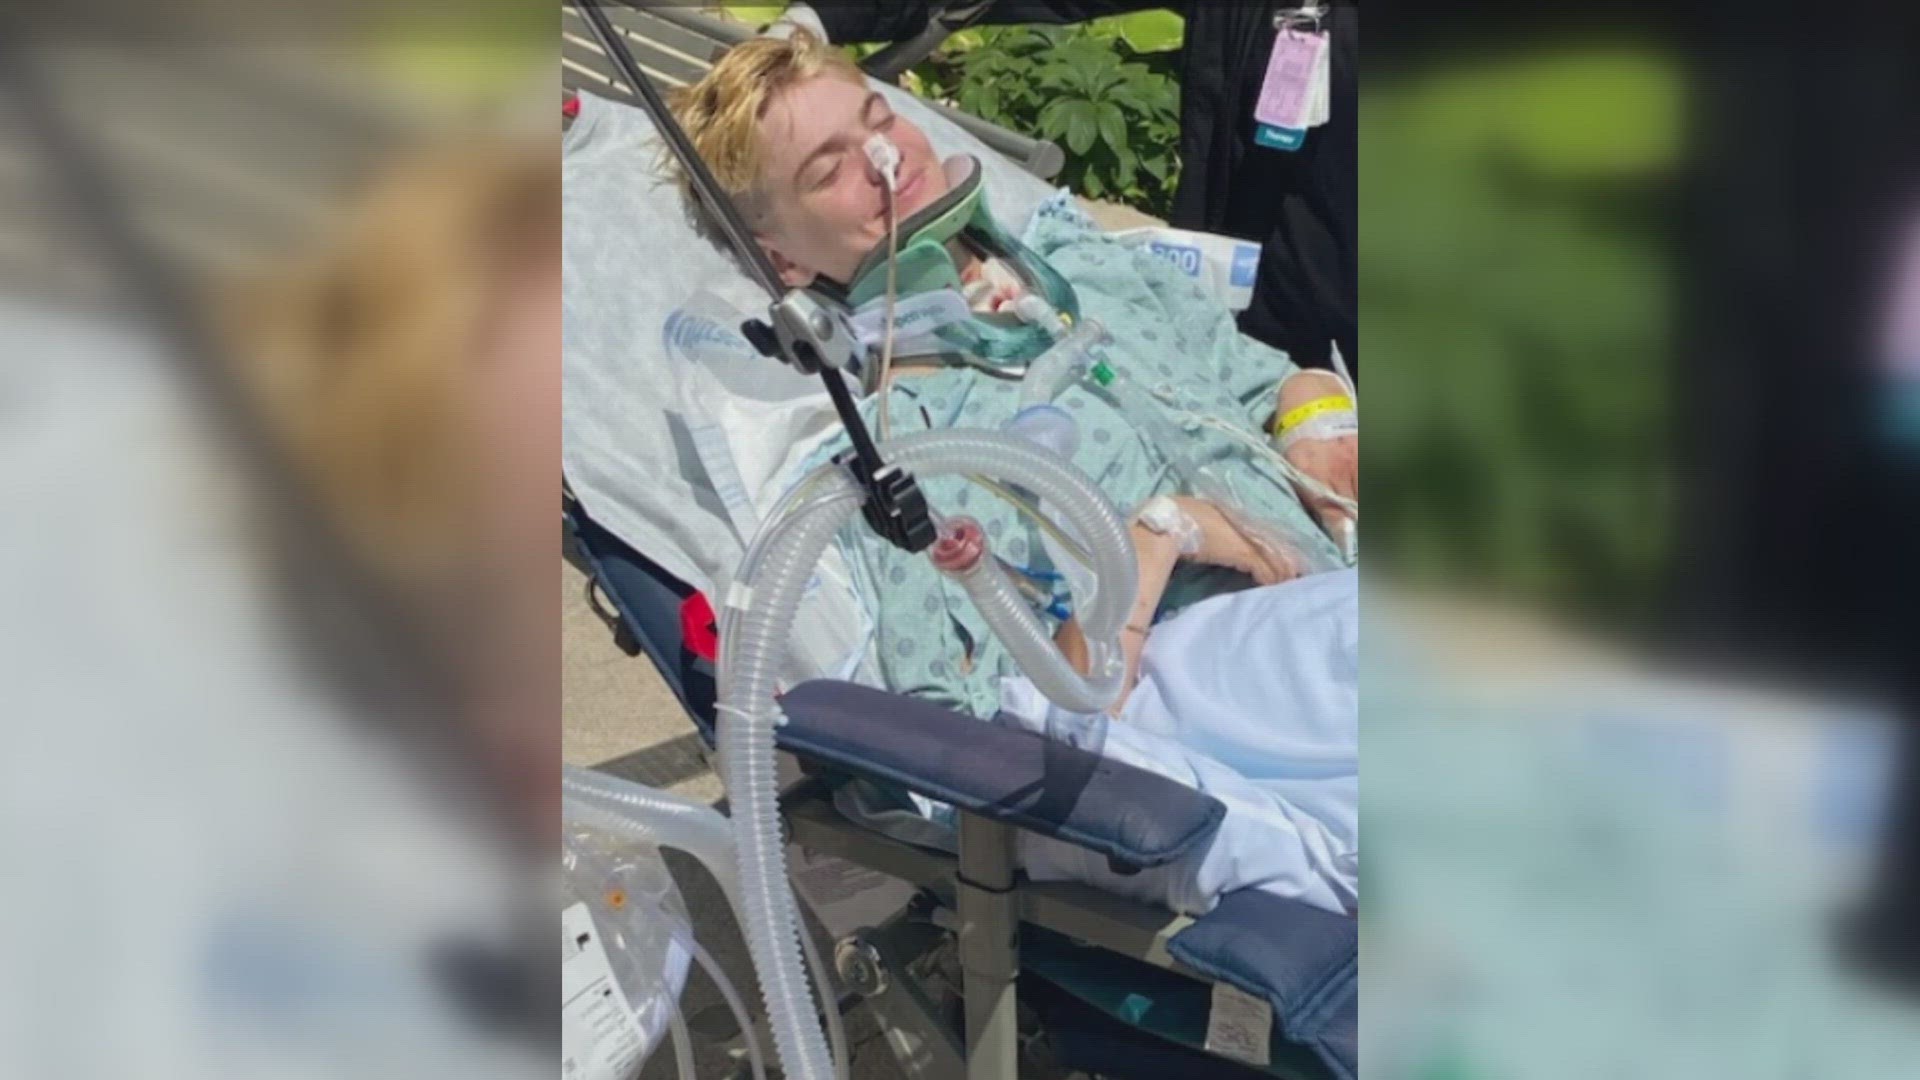 Jordan Ayers lay in a hospital bed on Tuesday, paralyzed from the waist down. The teen suffered a spinal cord injury when a stack of folding tables fell on him.